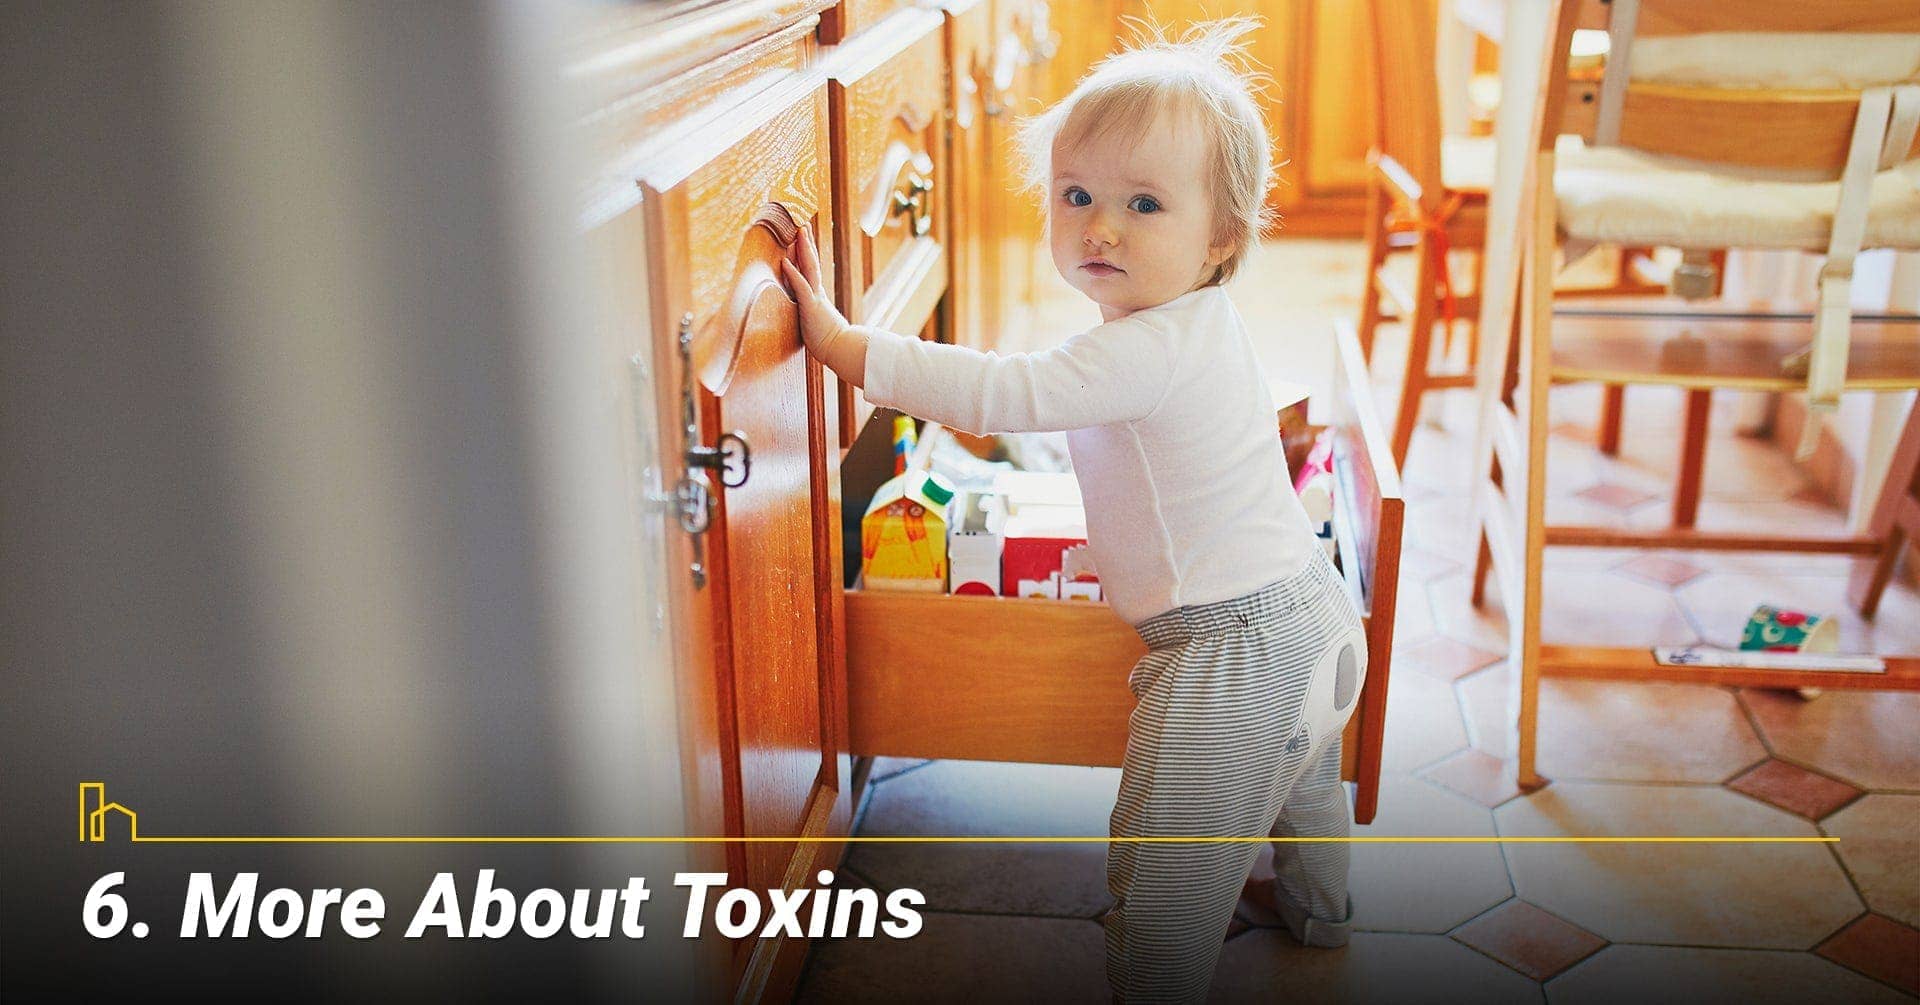 More About Toxins, keep household chemicals out of children reach